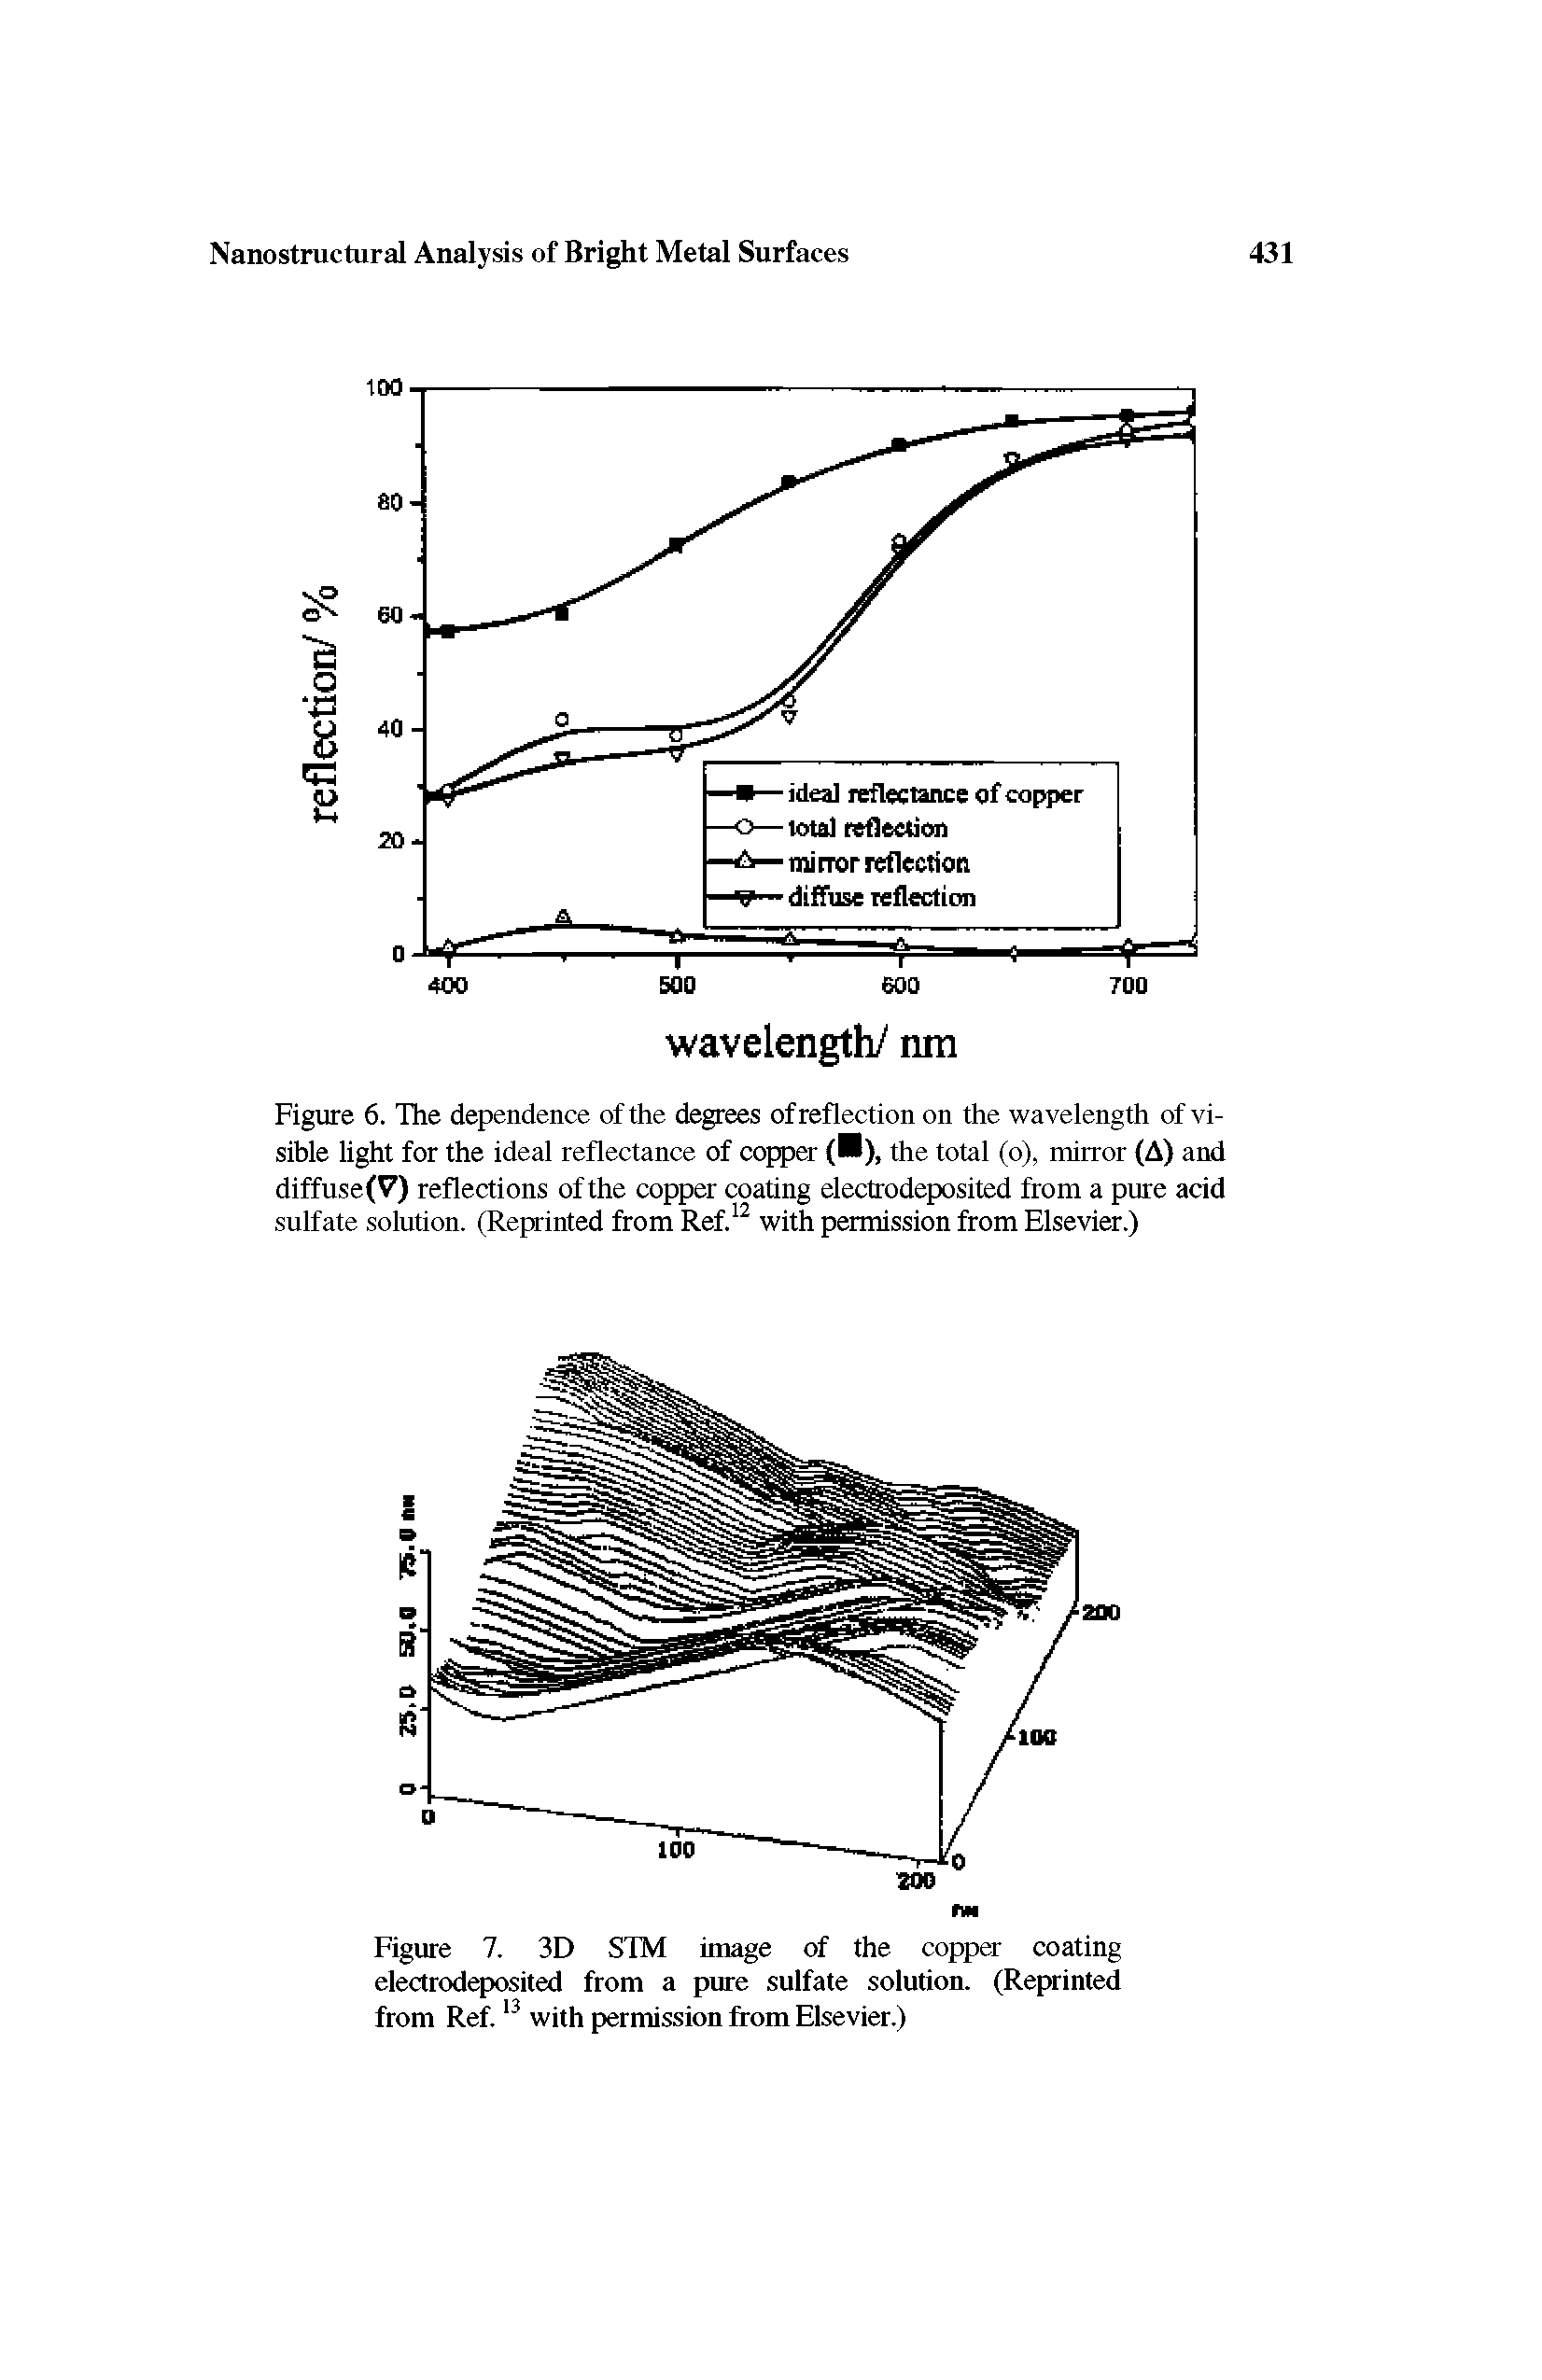 Figure 6. The dependence of the degrees of reflection on the wavelength of visible light for the ideal reflectance of copper (B), the total (o), mirror (A) and diffuse(V) reflections of the copper coating electrodeposited from a pure acid sulfate solution. (Reprinted from Ref.12 with permission from Elsevier.)...